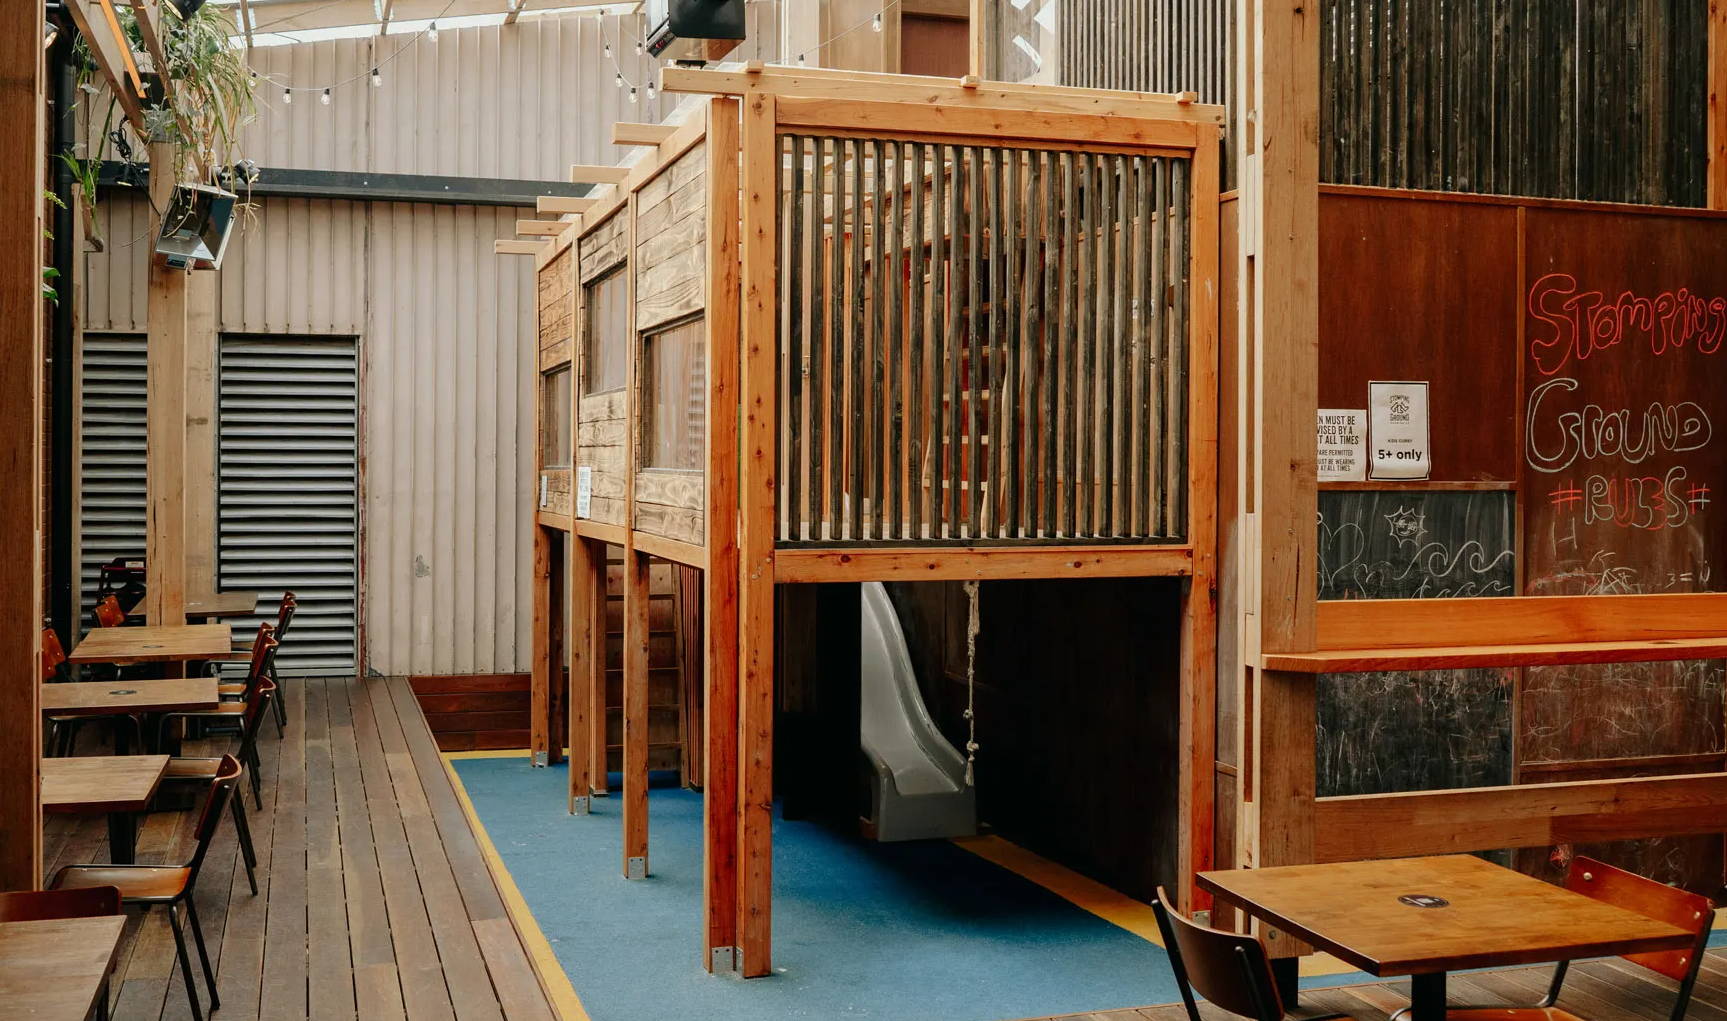 An internal wooden playground for commercial customer